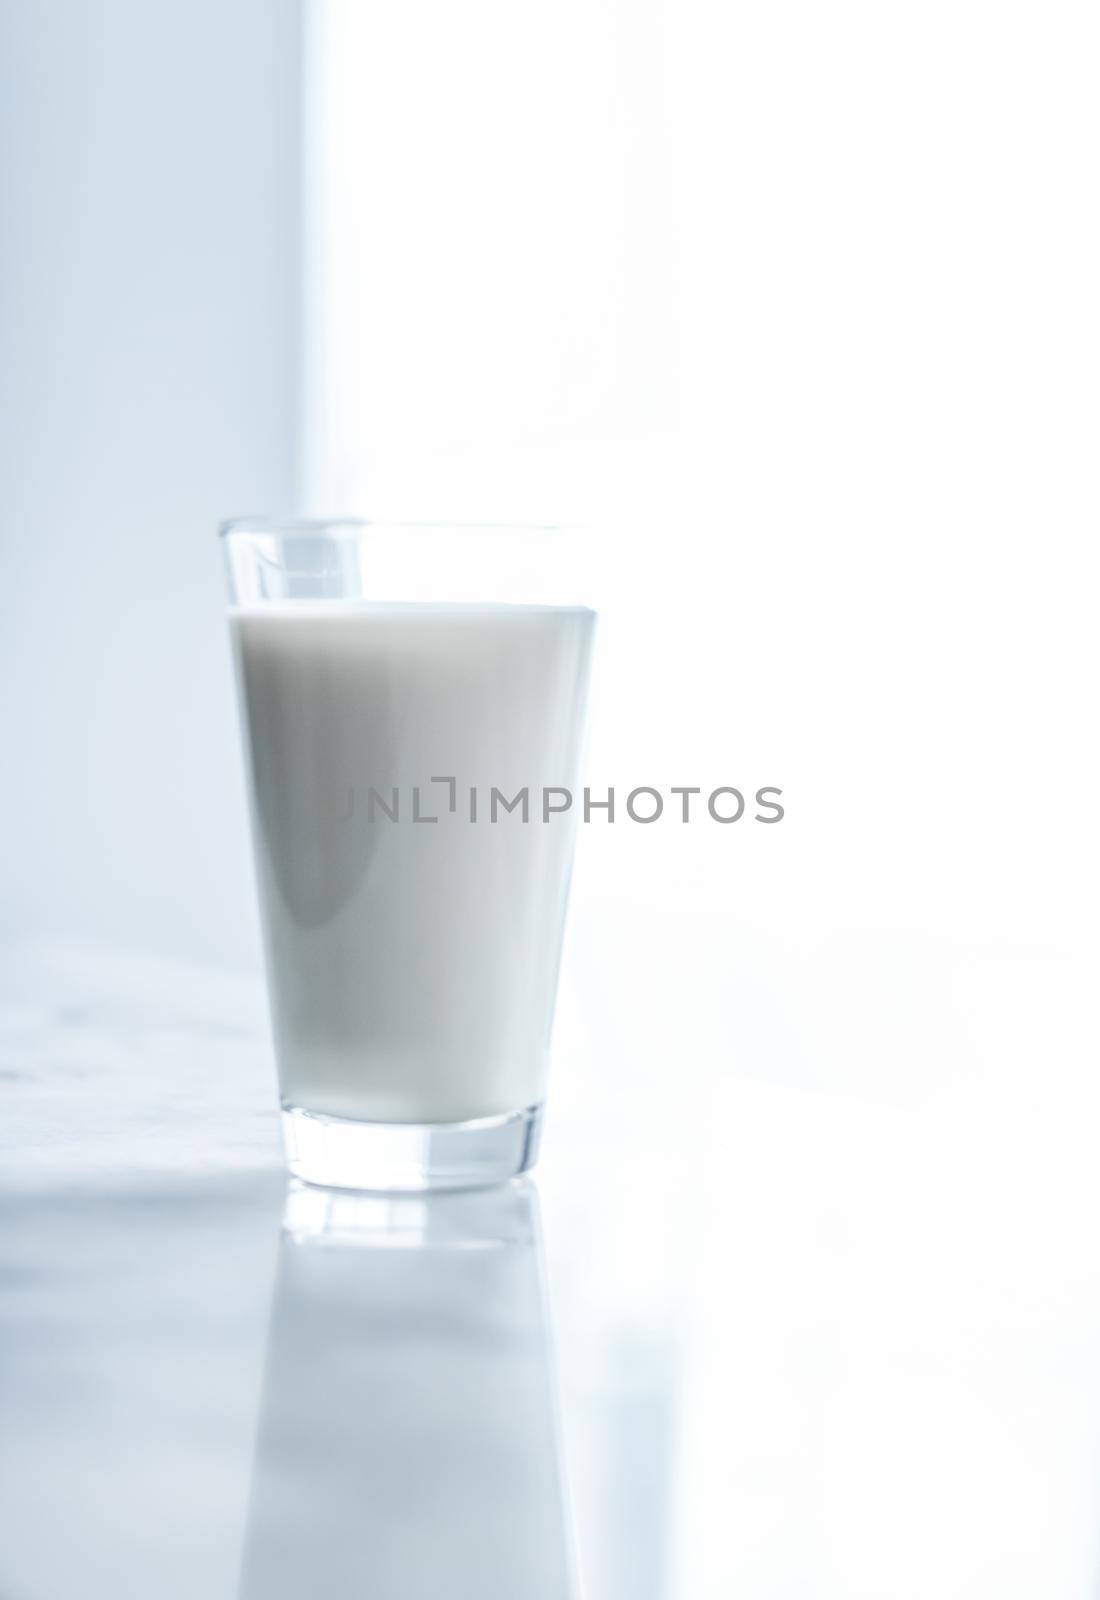 Dairy, healthy nutrition and breakfast concept - World Milk Day, full glass on marble table